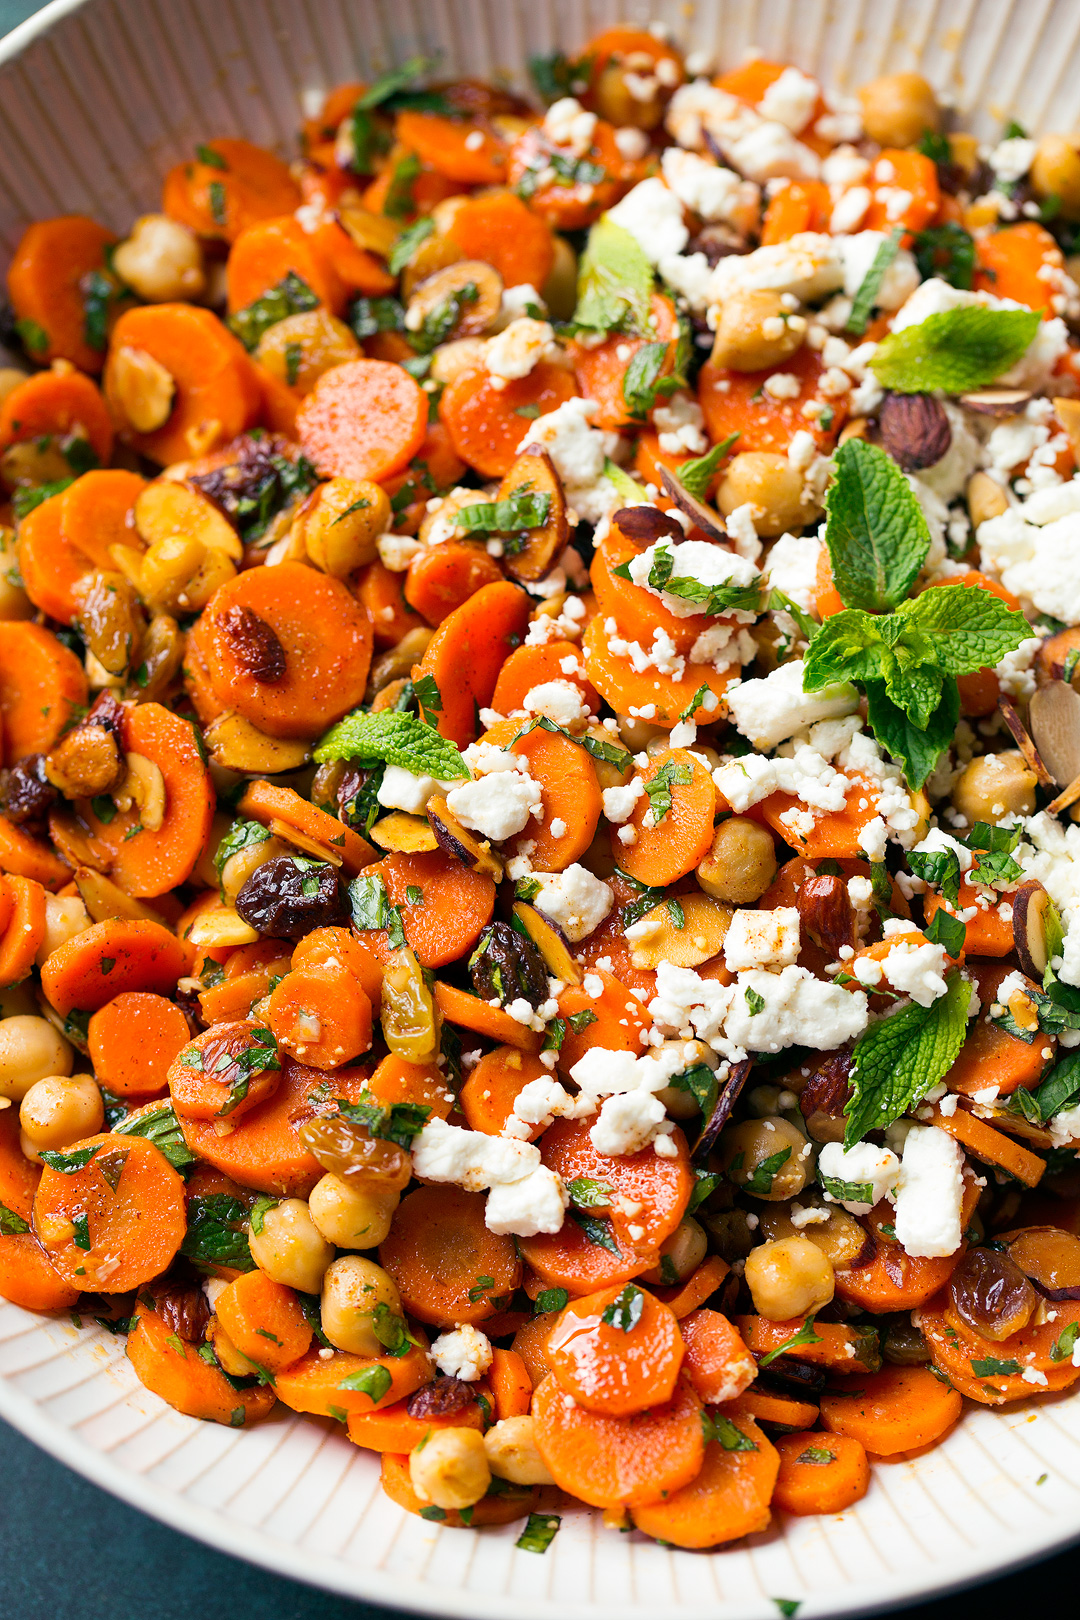 Close up image of Carrot Salad with Chick Peas Raisins and Feta.